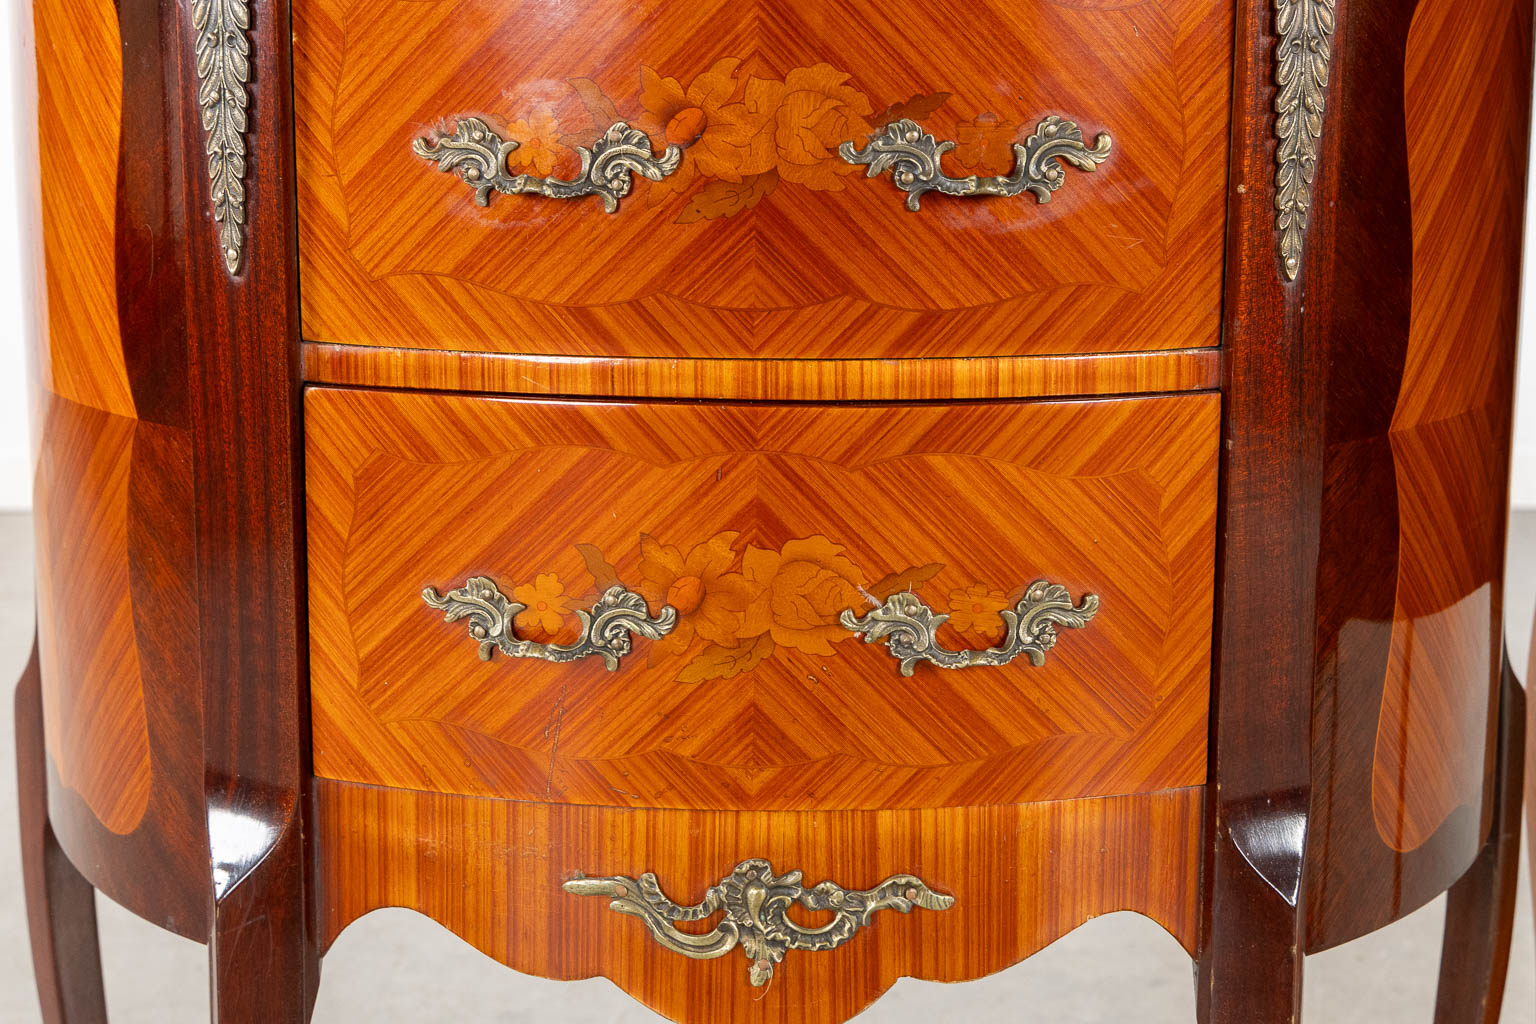 Two small cabinets with drawers, marquetry inlay and a marble top. 20th C. (L:39 x W:70 x H:80 cm)